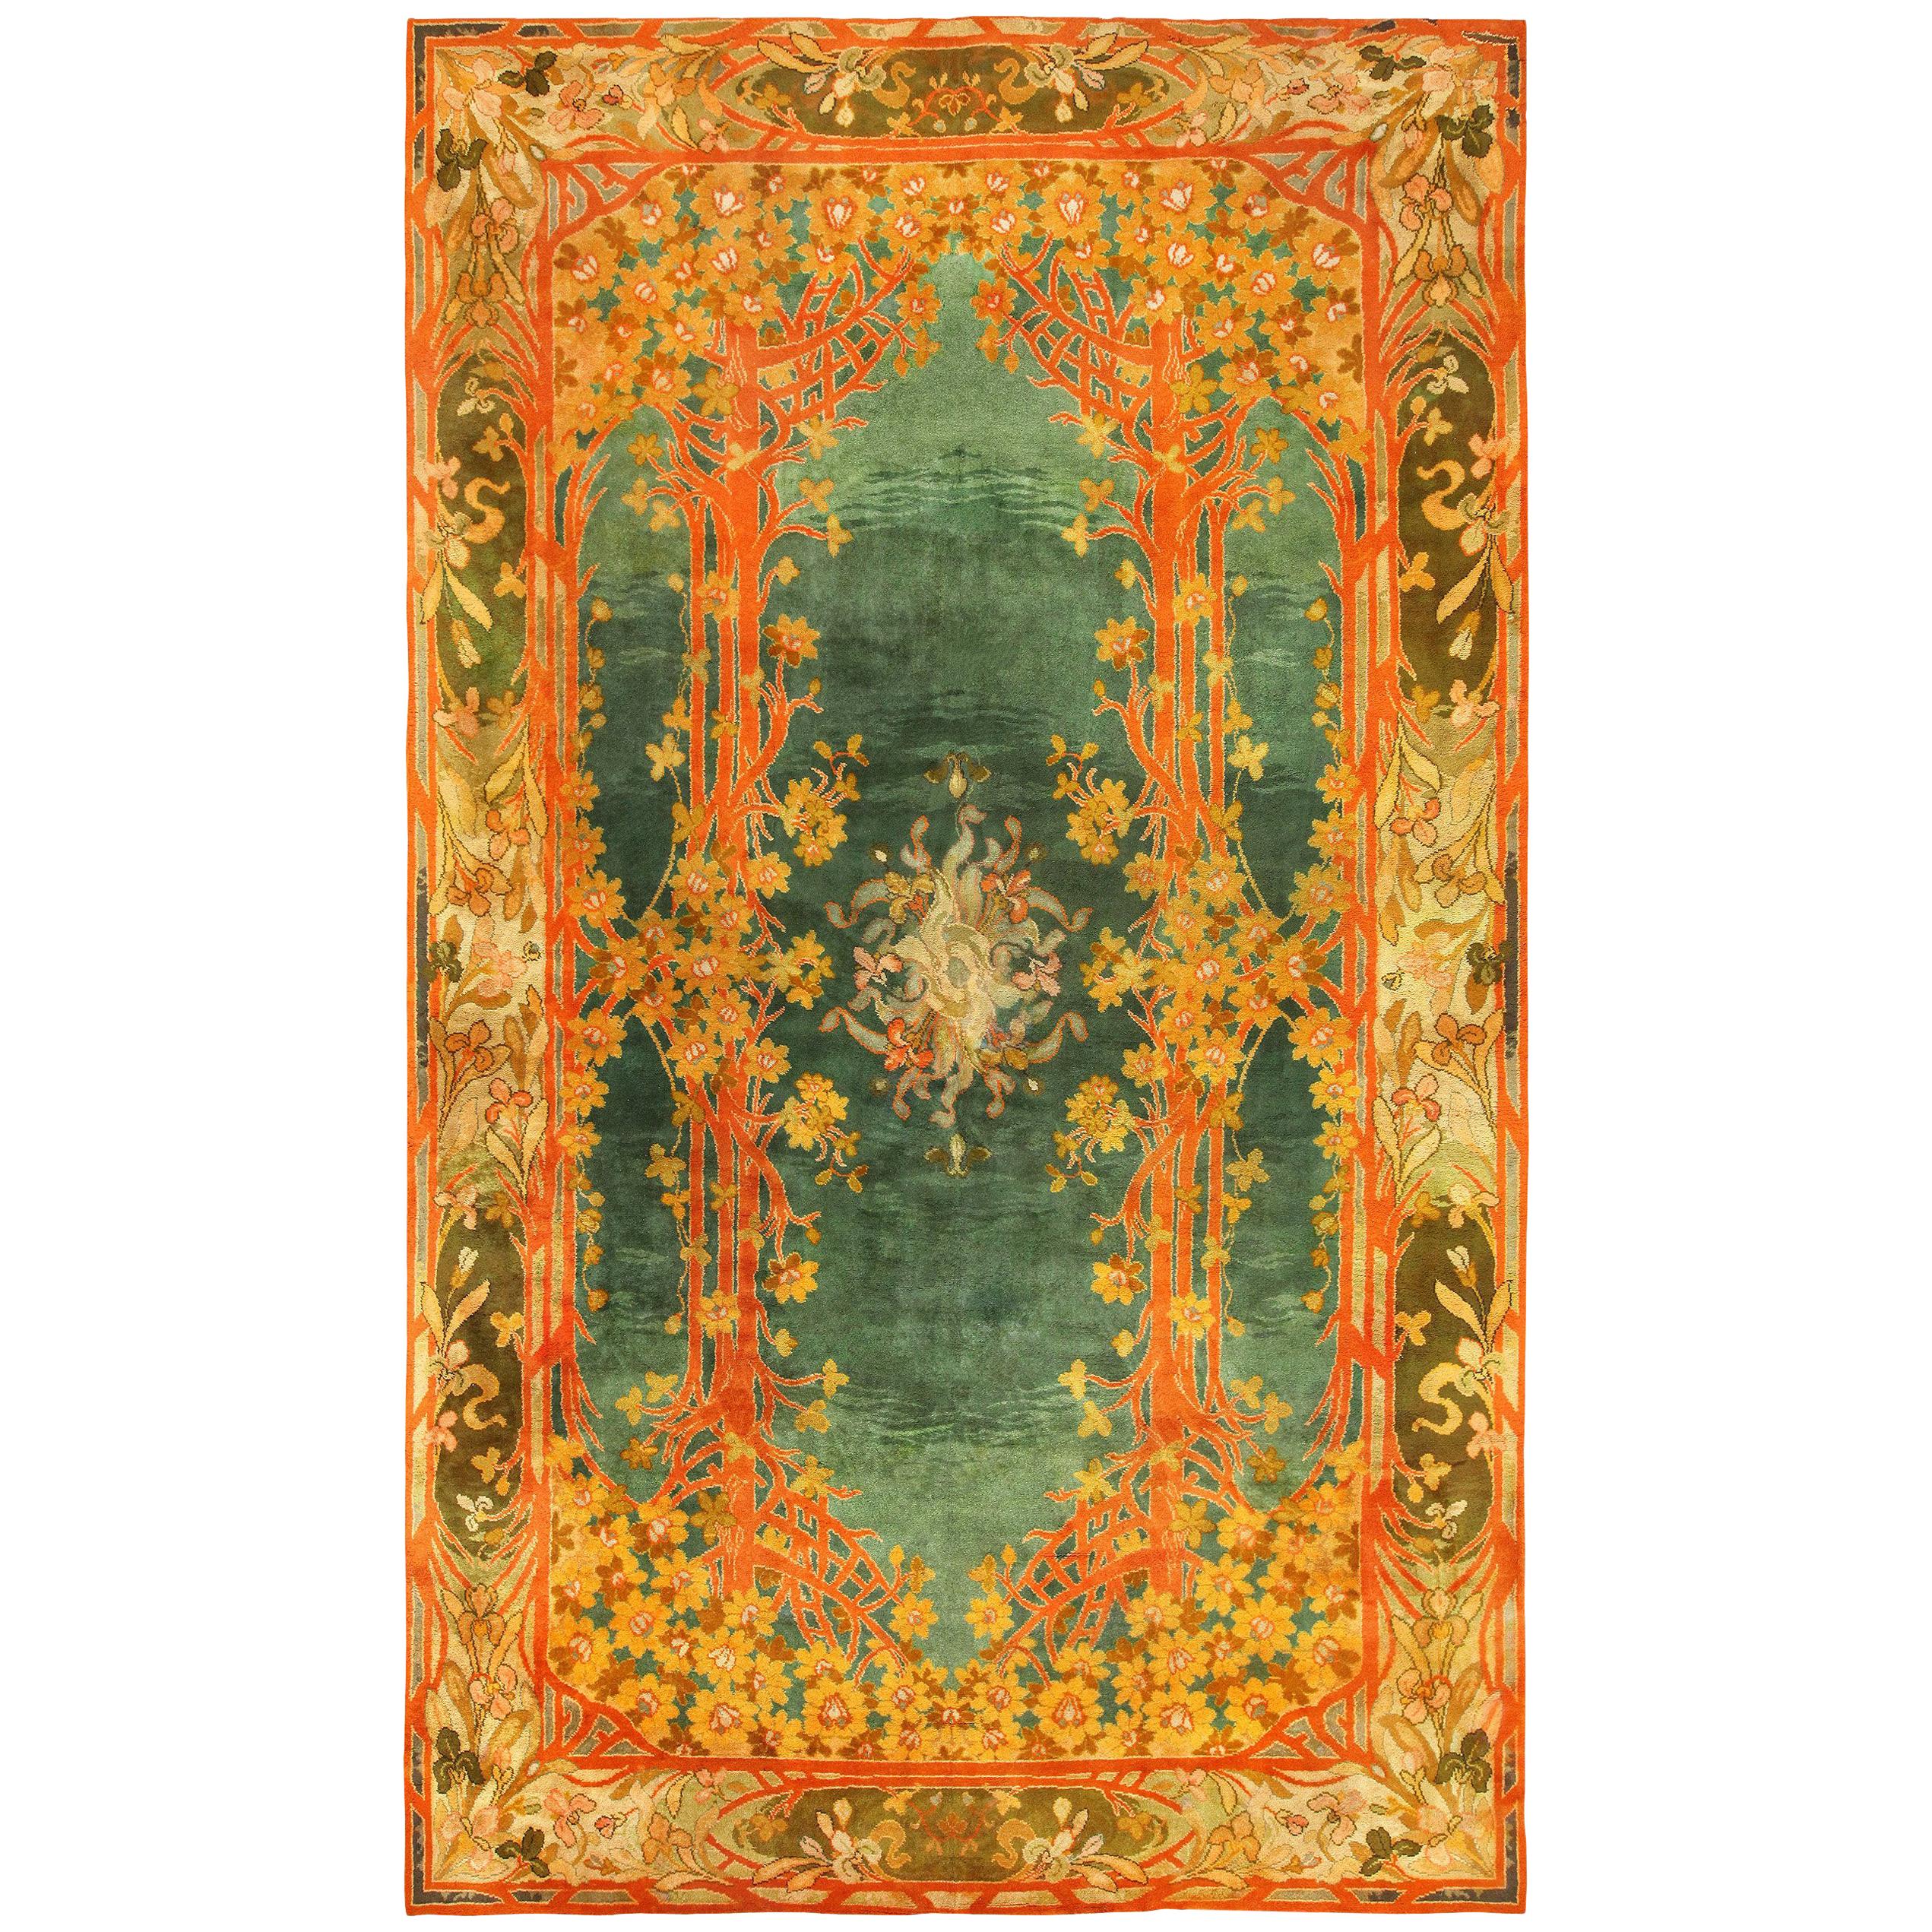 Nazmiyal Antique Art Nouveau Donegal Rug. 10 ft 2 in x 17 ft (3.1 m x 5.18 m)